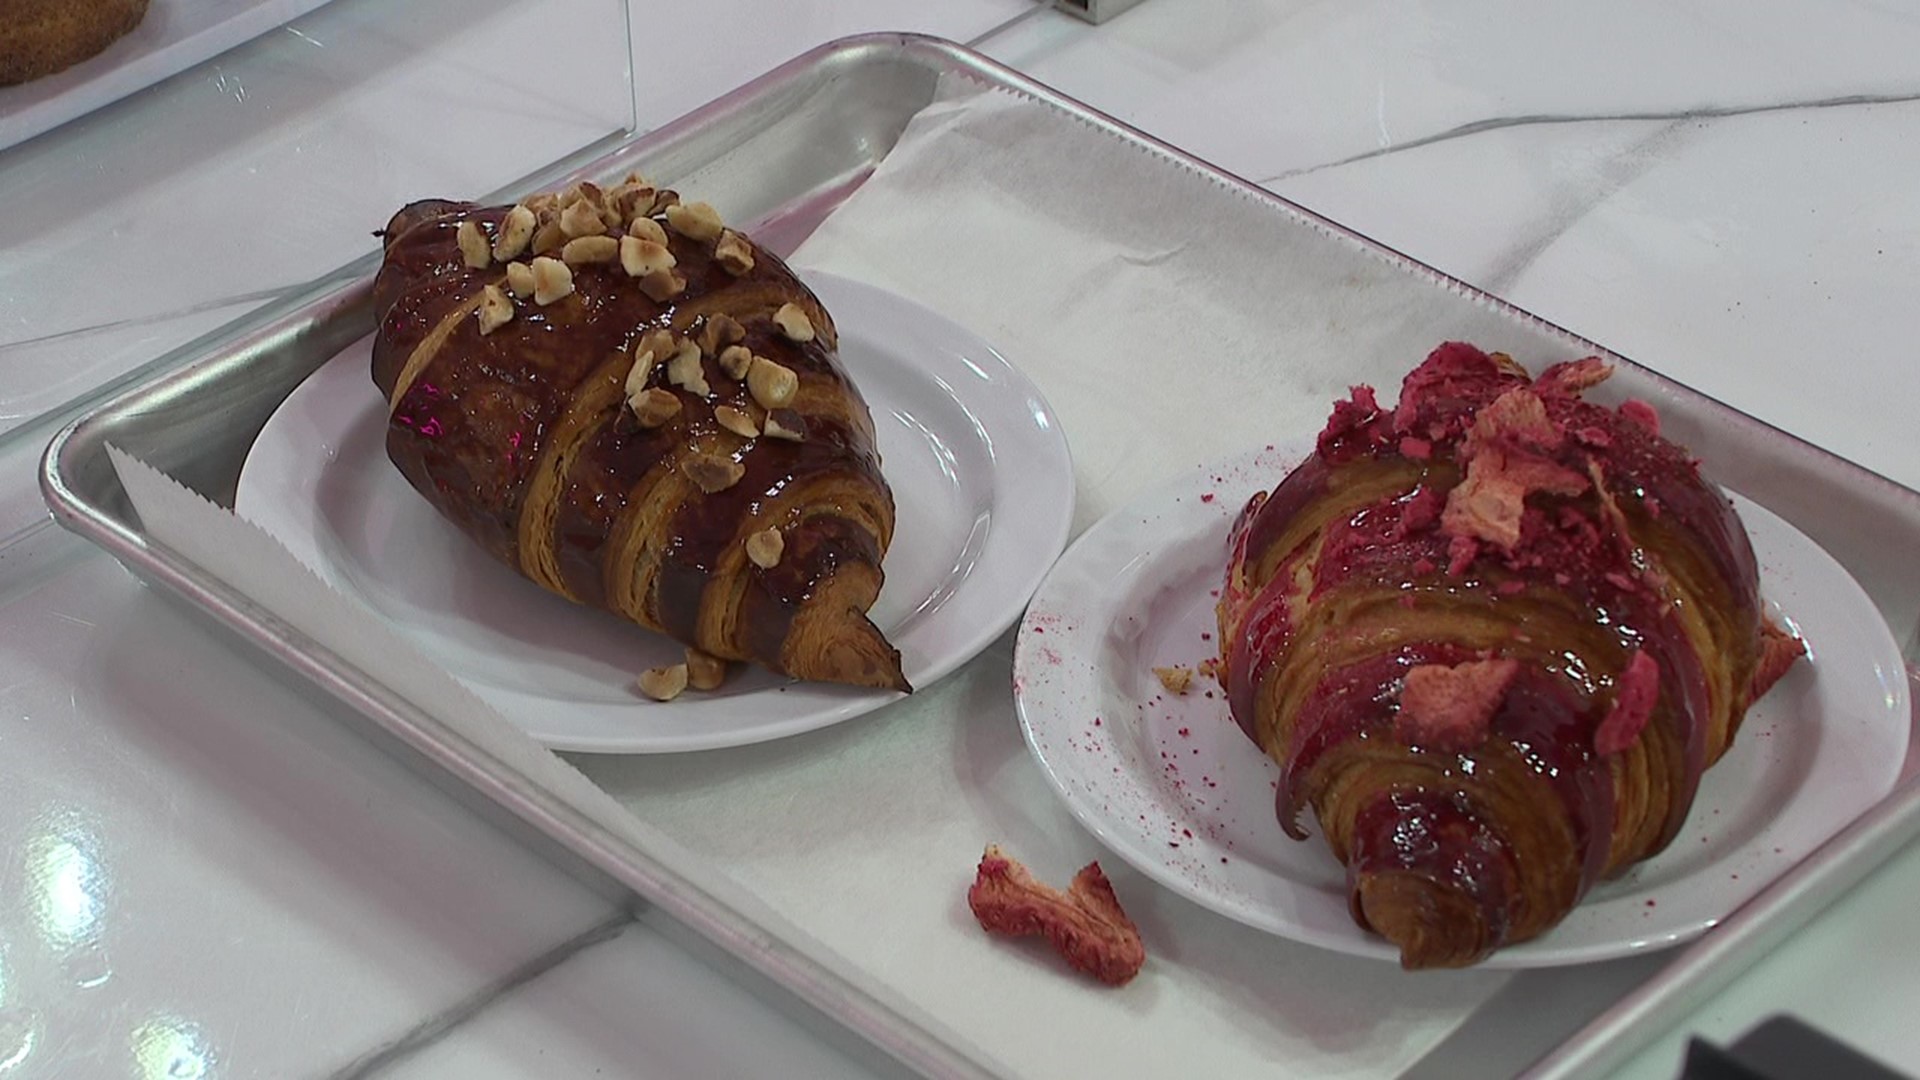 A new bakery in Lewisburg is celebrating its soft opening on National Croissant Day.